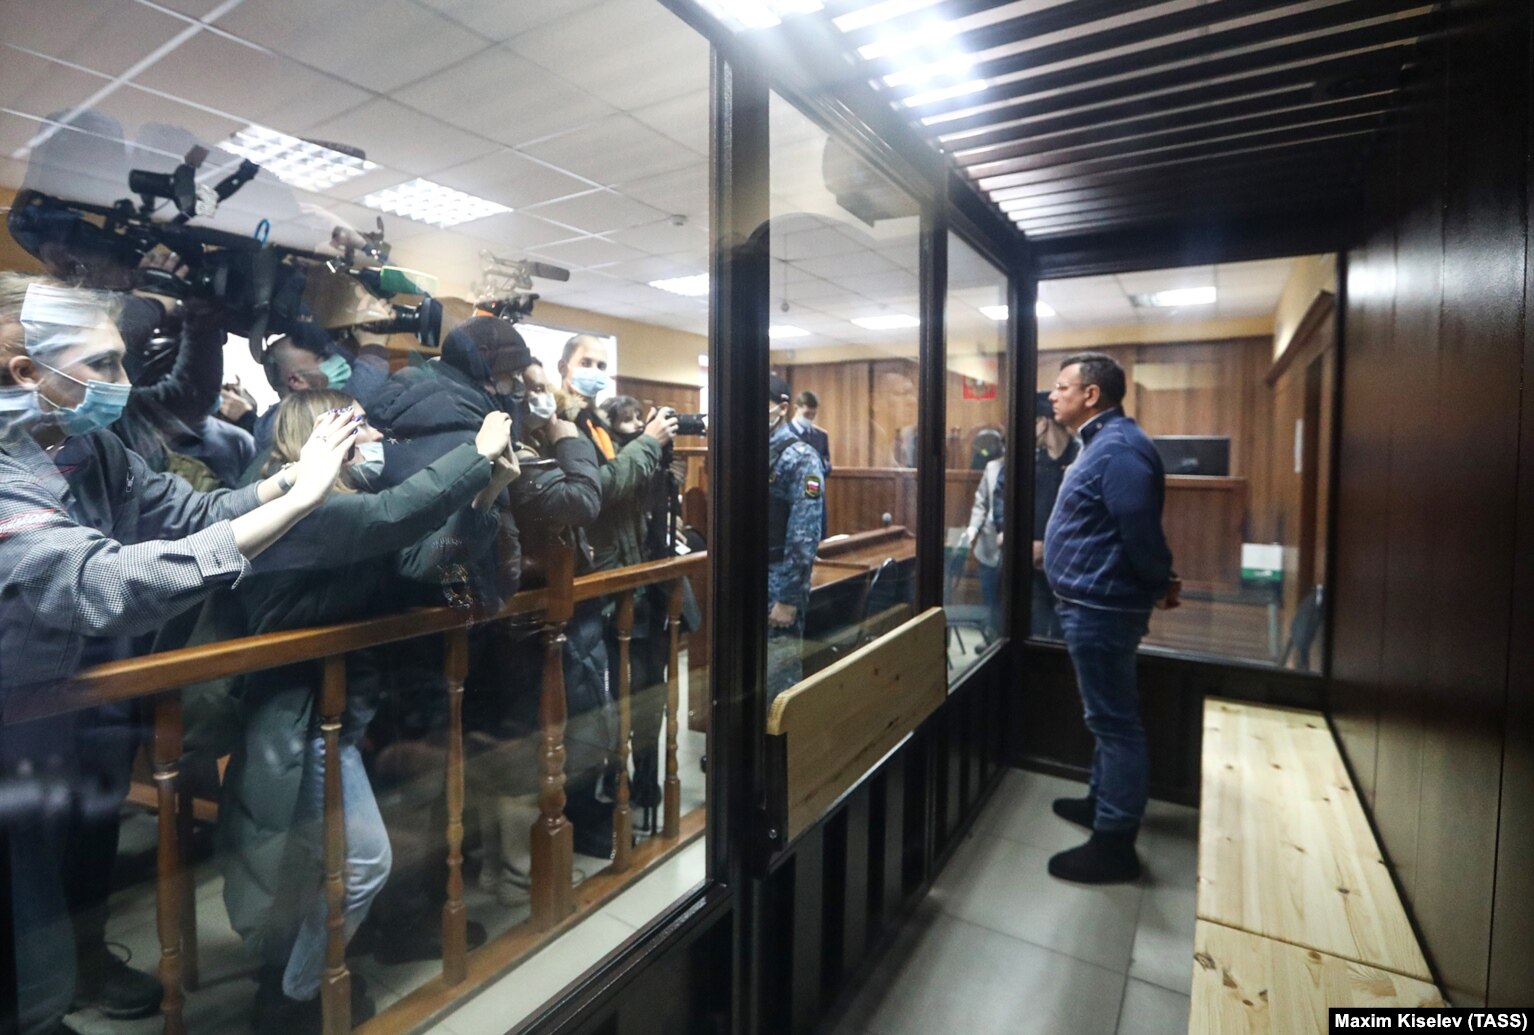 The director of the Listvyazhnaya coal mine, Sergei Makhrakov, seen inside a defendant's cage in a courtroom in Kemerovo, is accused of violating industrial safety rules that led to the deaths of the miners.